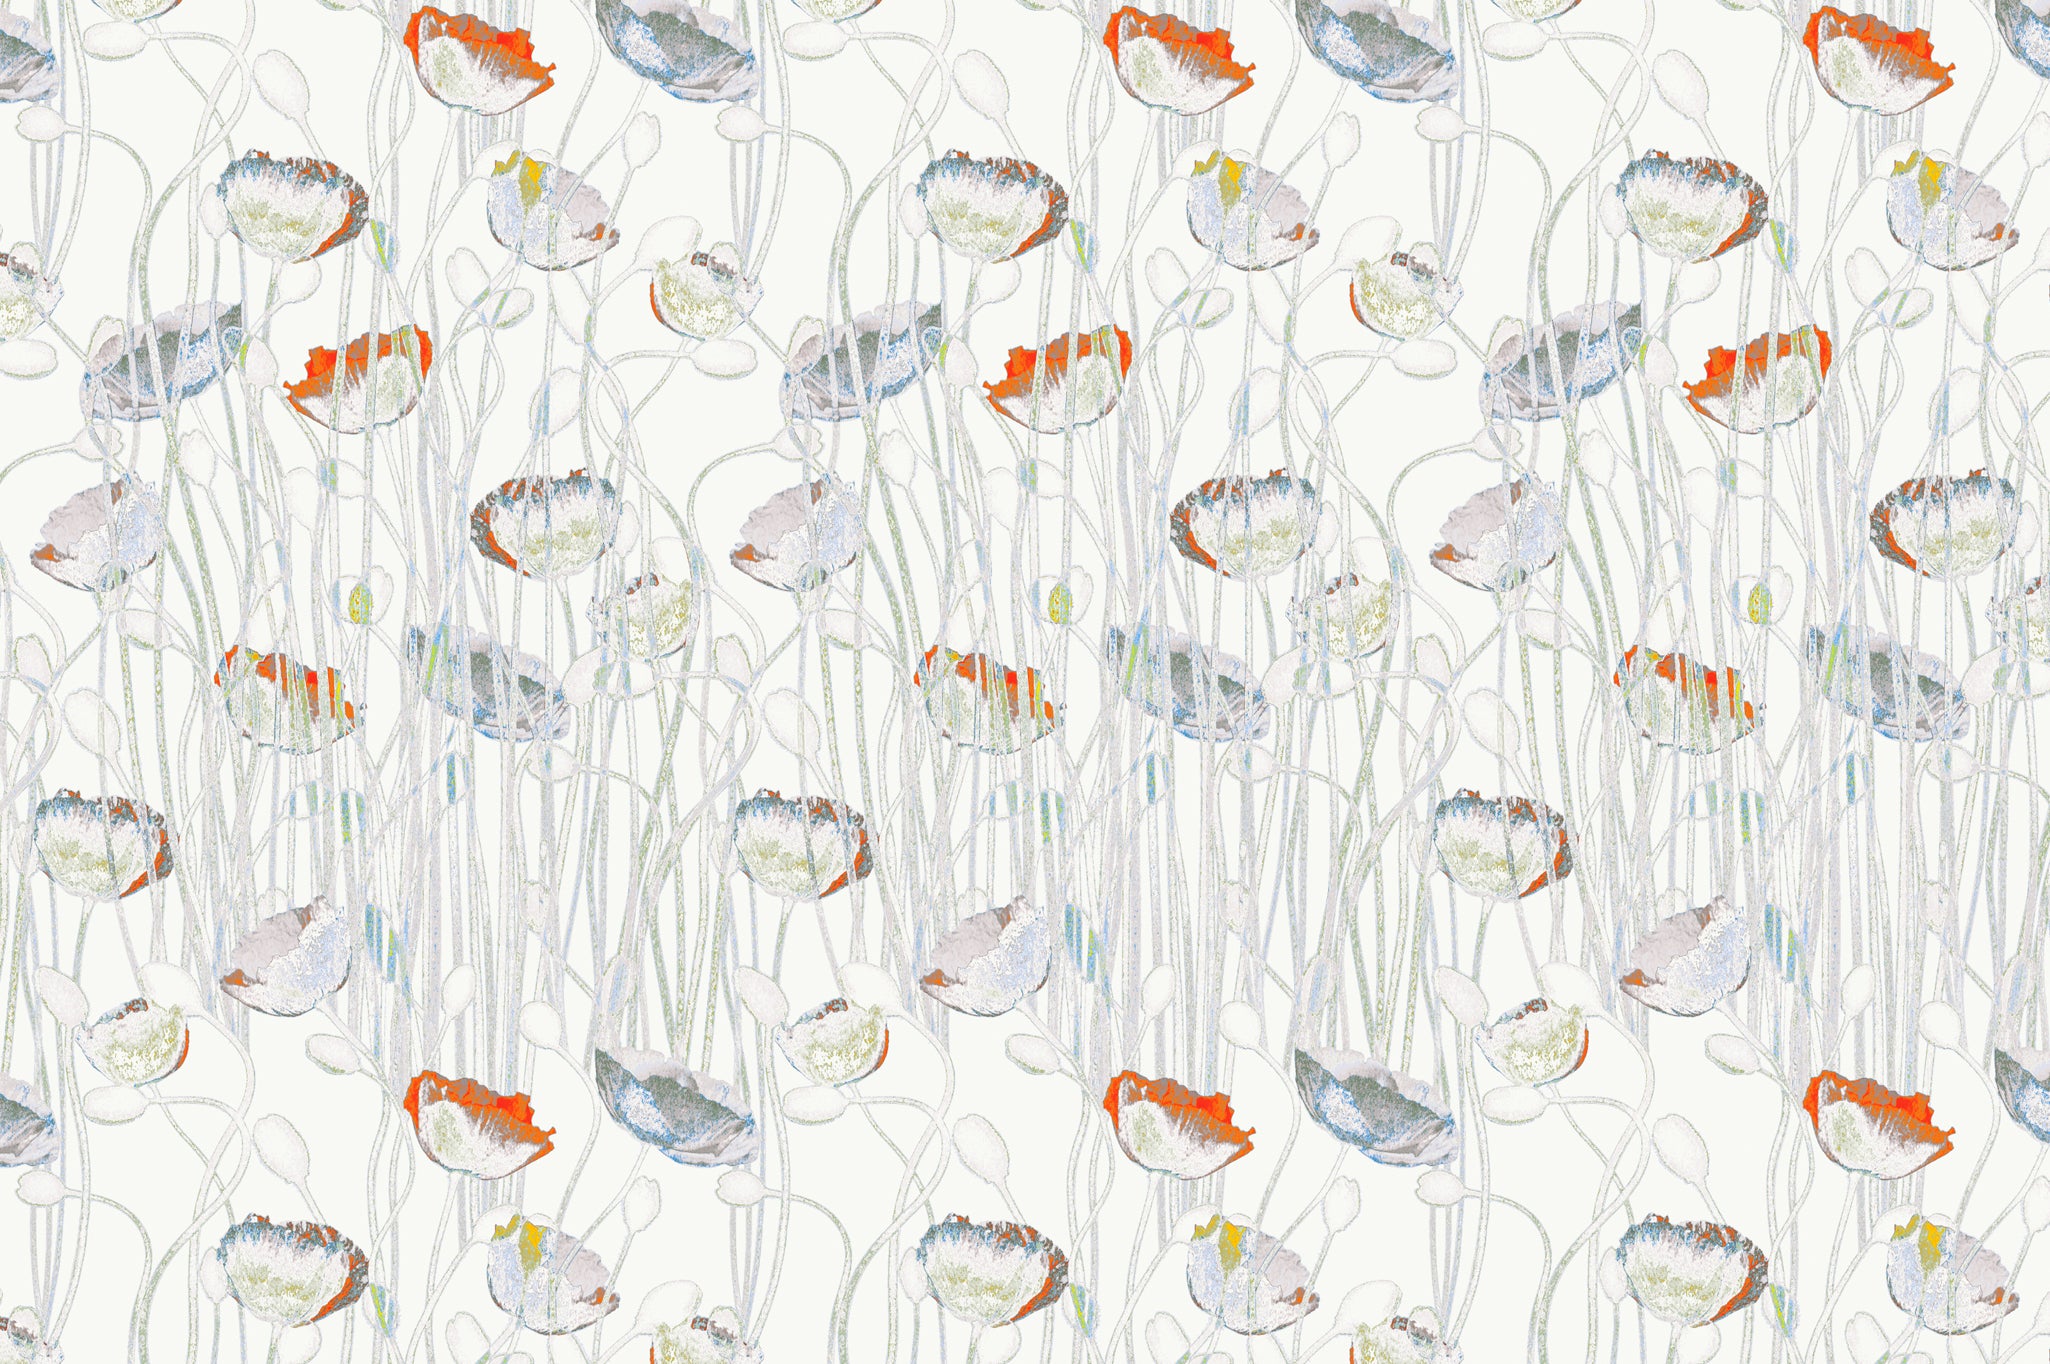 Detail of fabric in a dense poppy print in shades of orange, white and blue on a white field.